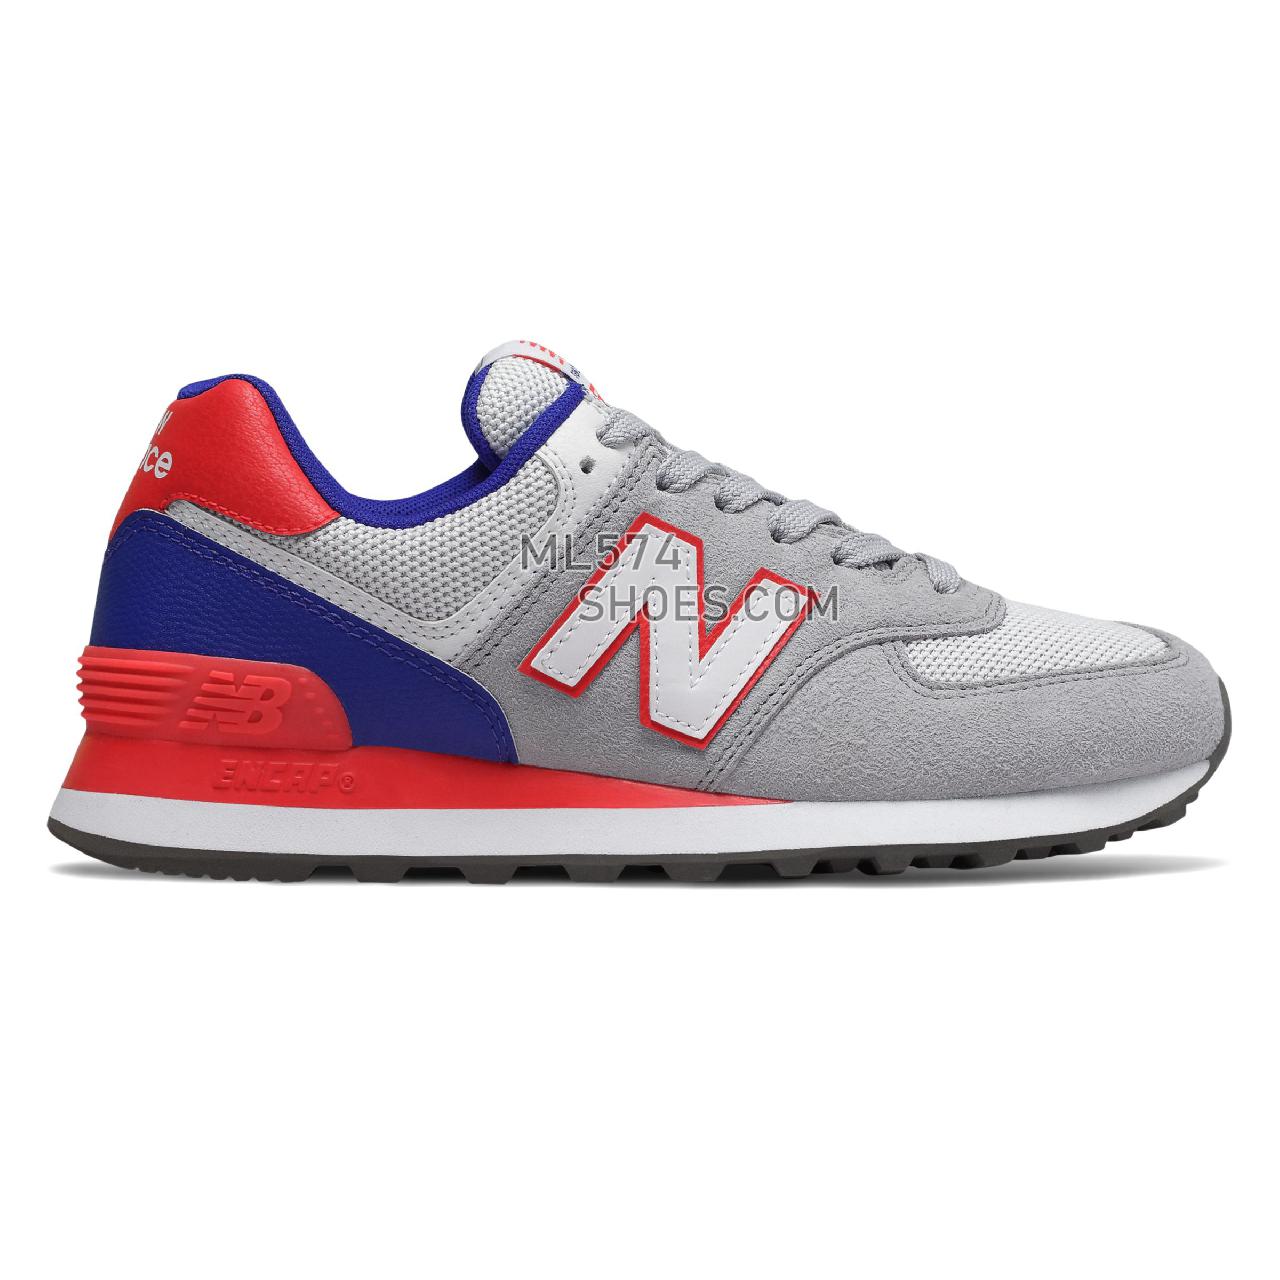 New Balance 574 Summer Sport - Women's Classic Sneakers - Rain Cloud with Energy Red - WL574NIC